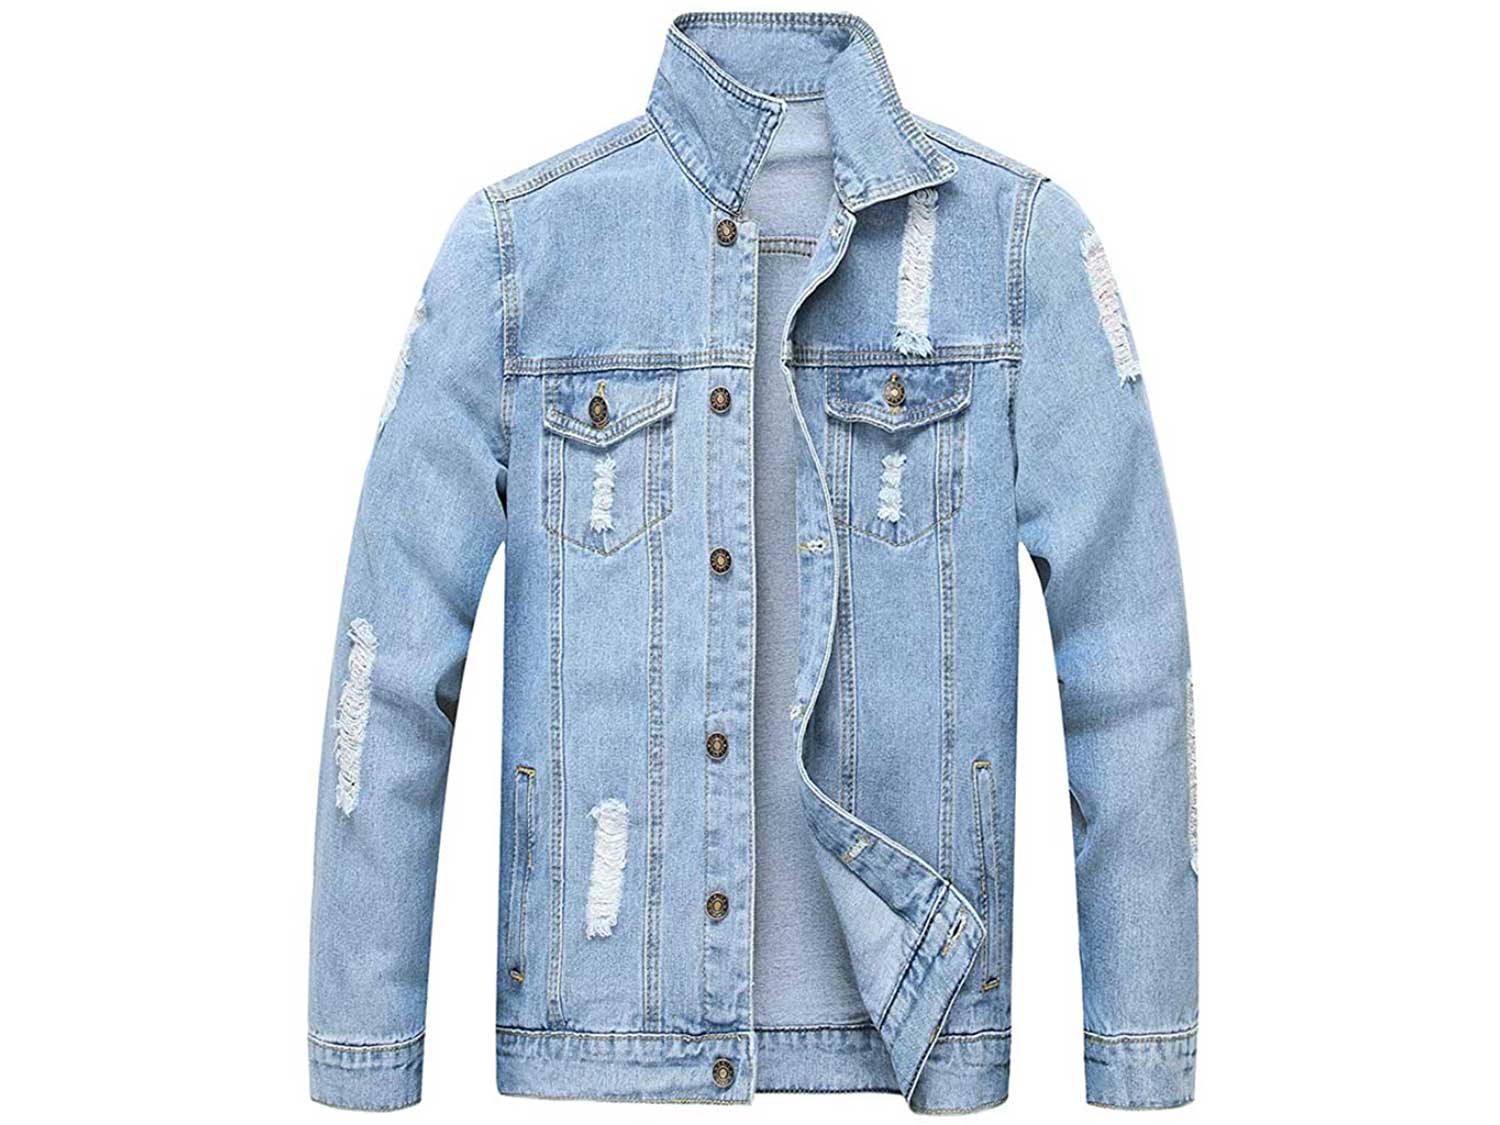 21 Timeless Classic Denim Blue Jean Jackets for Women: Summer Jackets 2023  | Jacket outfit women, Blue jean jacket outfits, Jean jacket outfits